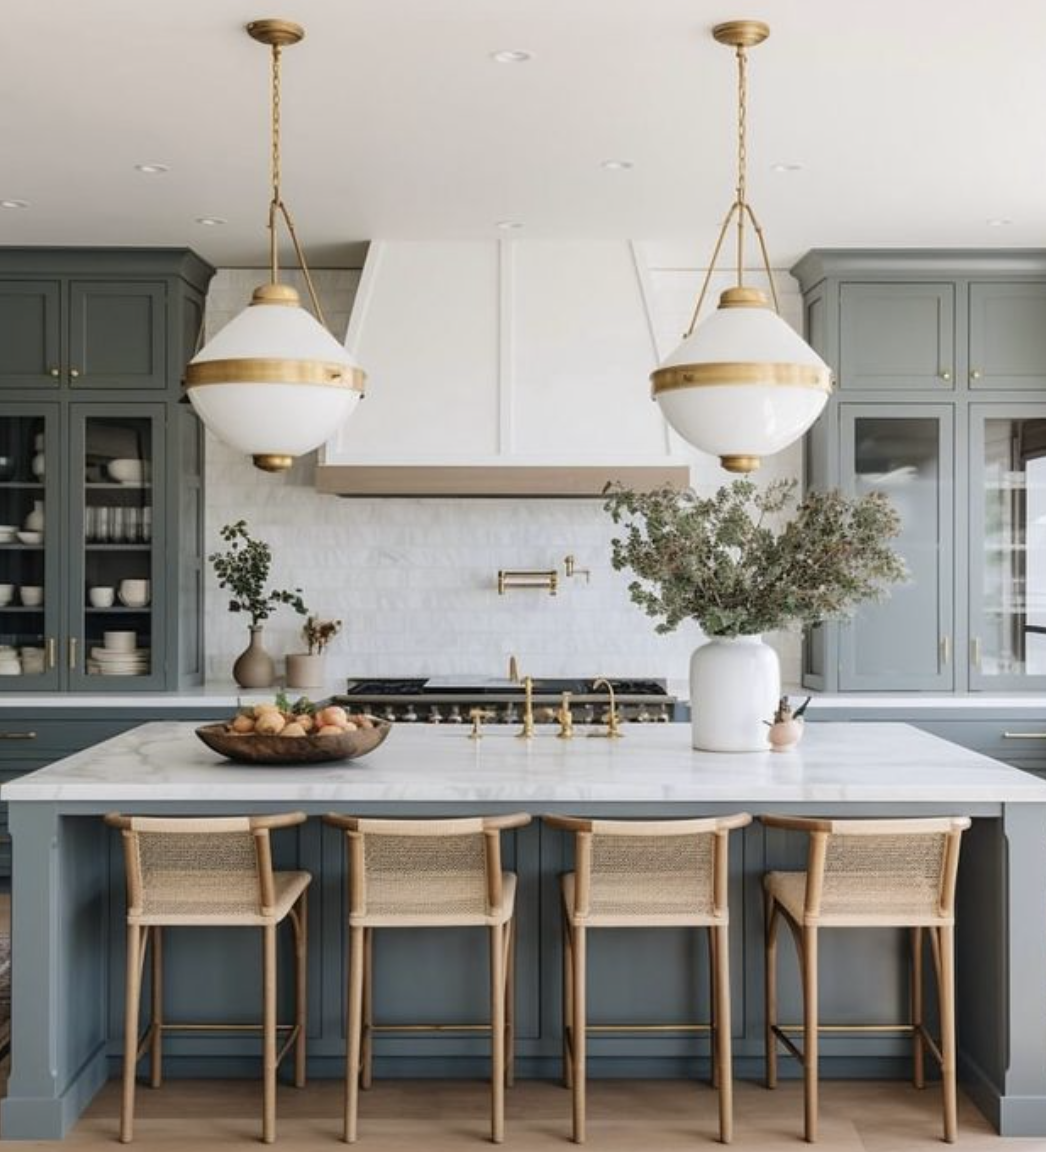 Elevate your home's style without breaking the bank with our 10 budget-friendly design tips. From sophisticated paint choices to statement pieces and clever lighting, transform your space into a luxurious haven.